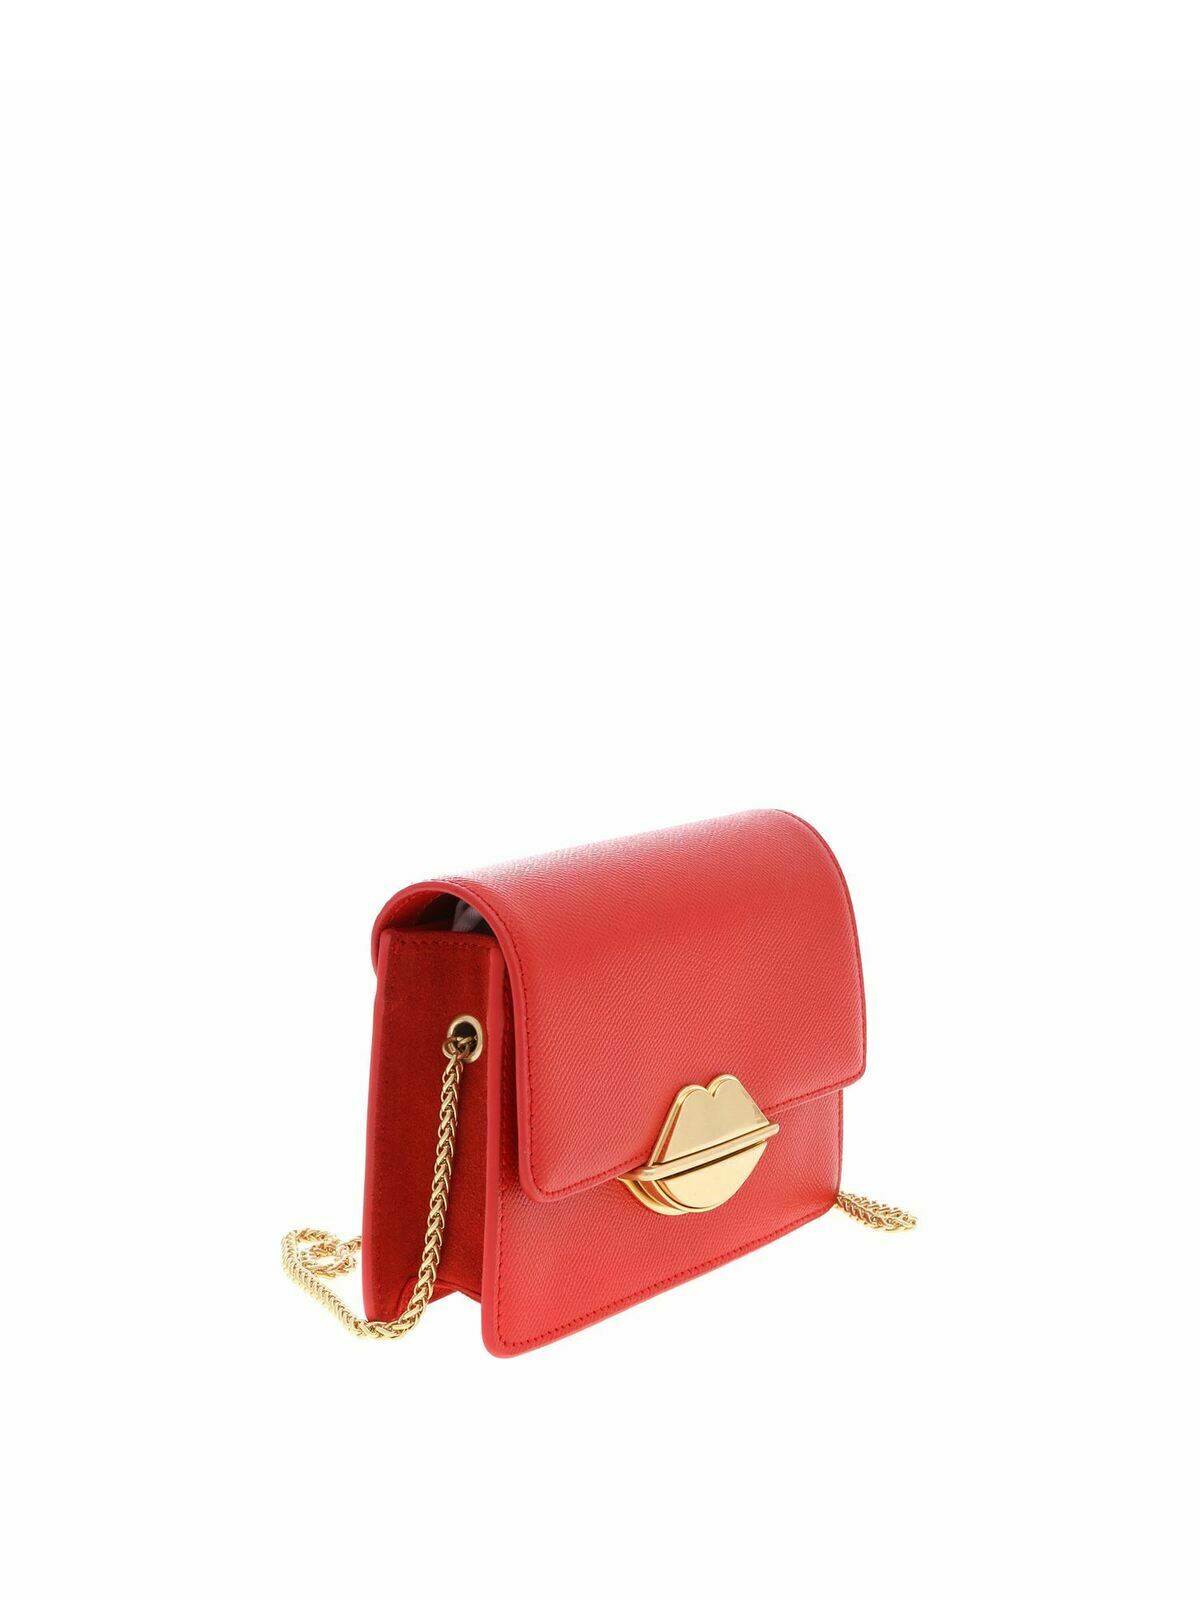 Shop Lulu Guinness Polly Bag In Red Hammered Leather In Rojo